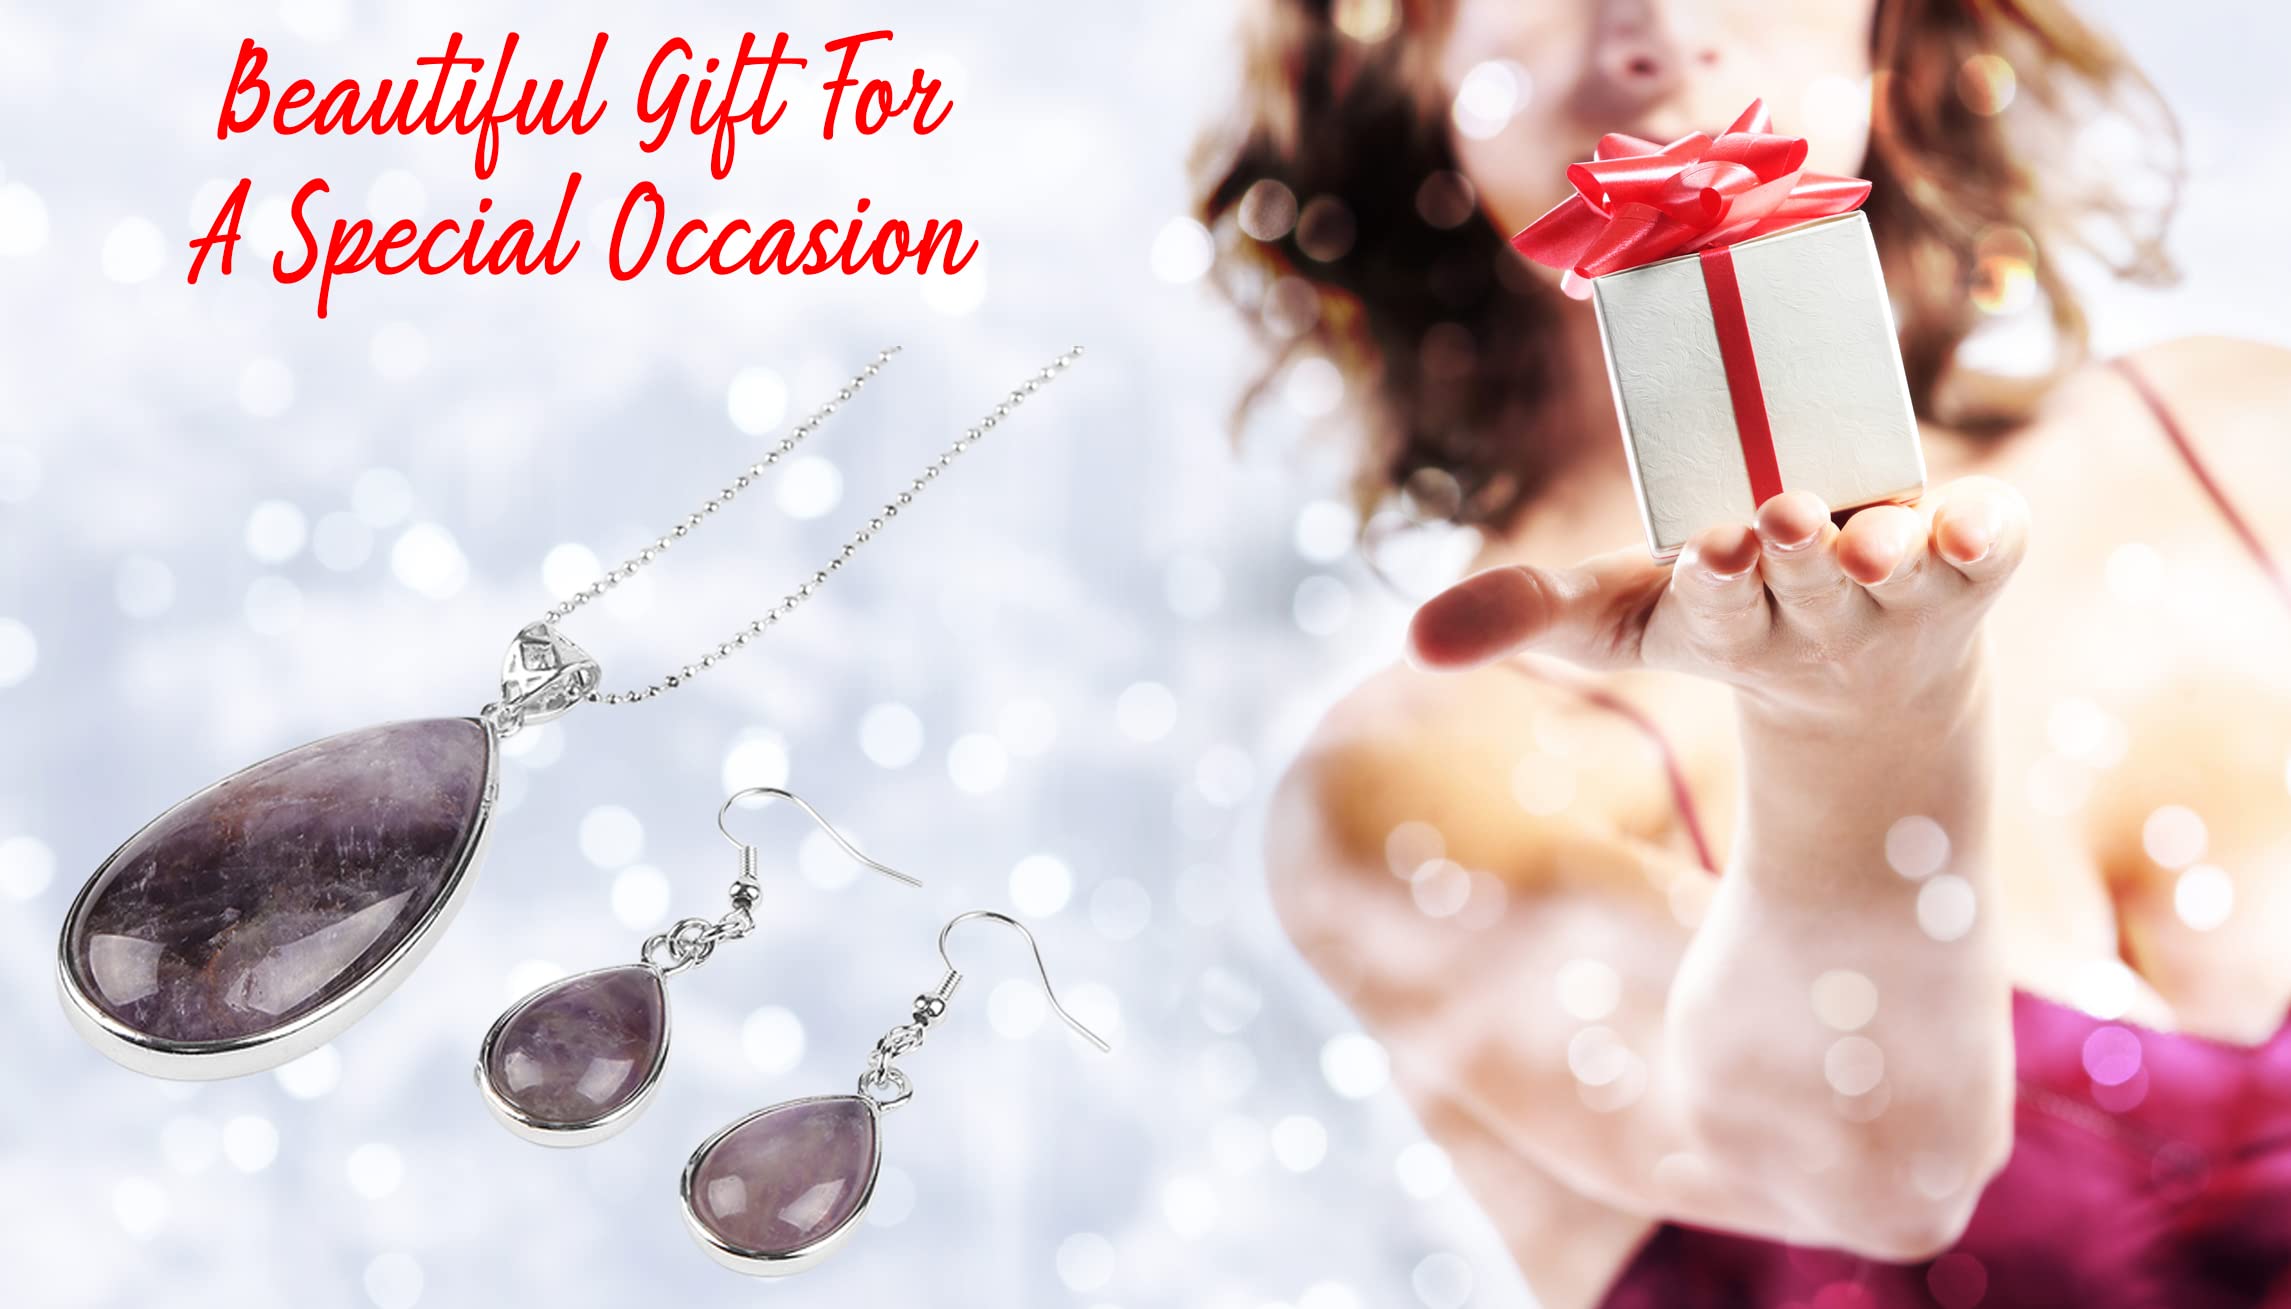 Ladies Matching Jewellery Set for Women - Teardrop Design Necklace Pendant &amp; Drop Earrings - With Jewellery Gift Box